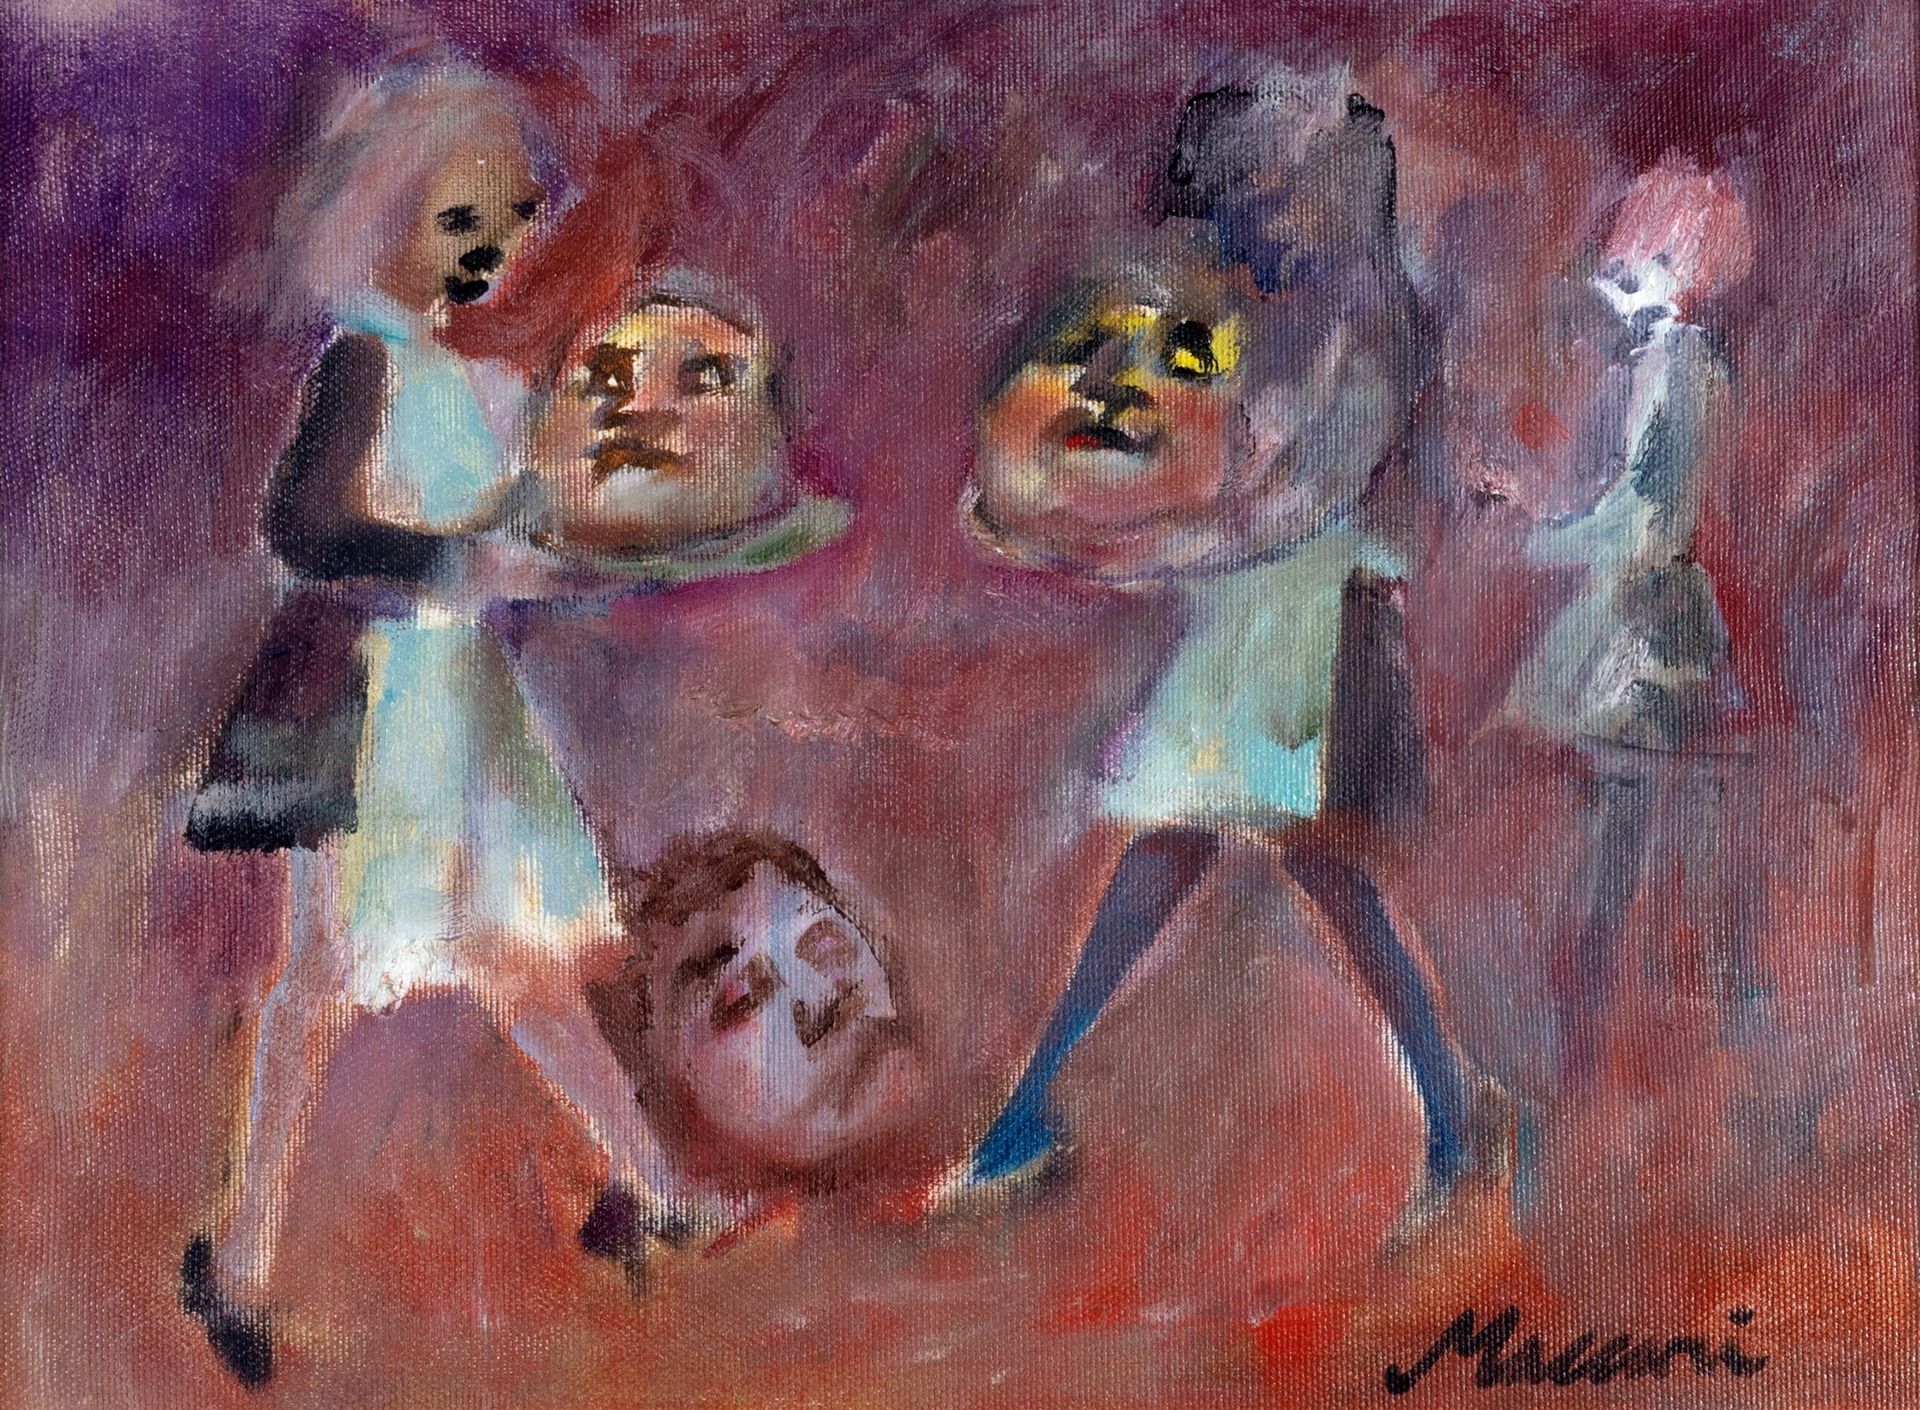 MINO MACCARI The waitresses, 70's

oil on canvas
30 x 40 cm
Signed lower right: &hellip;